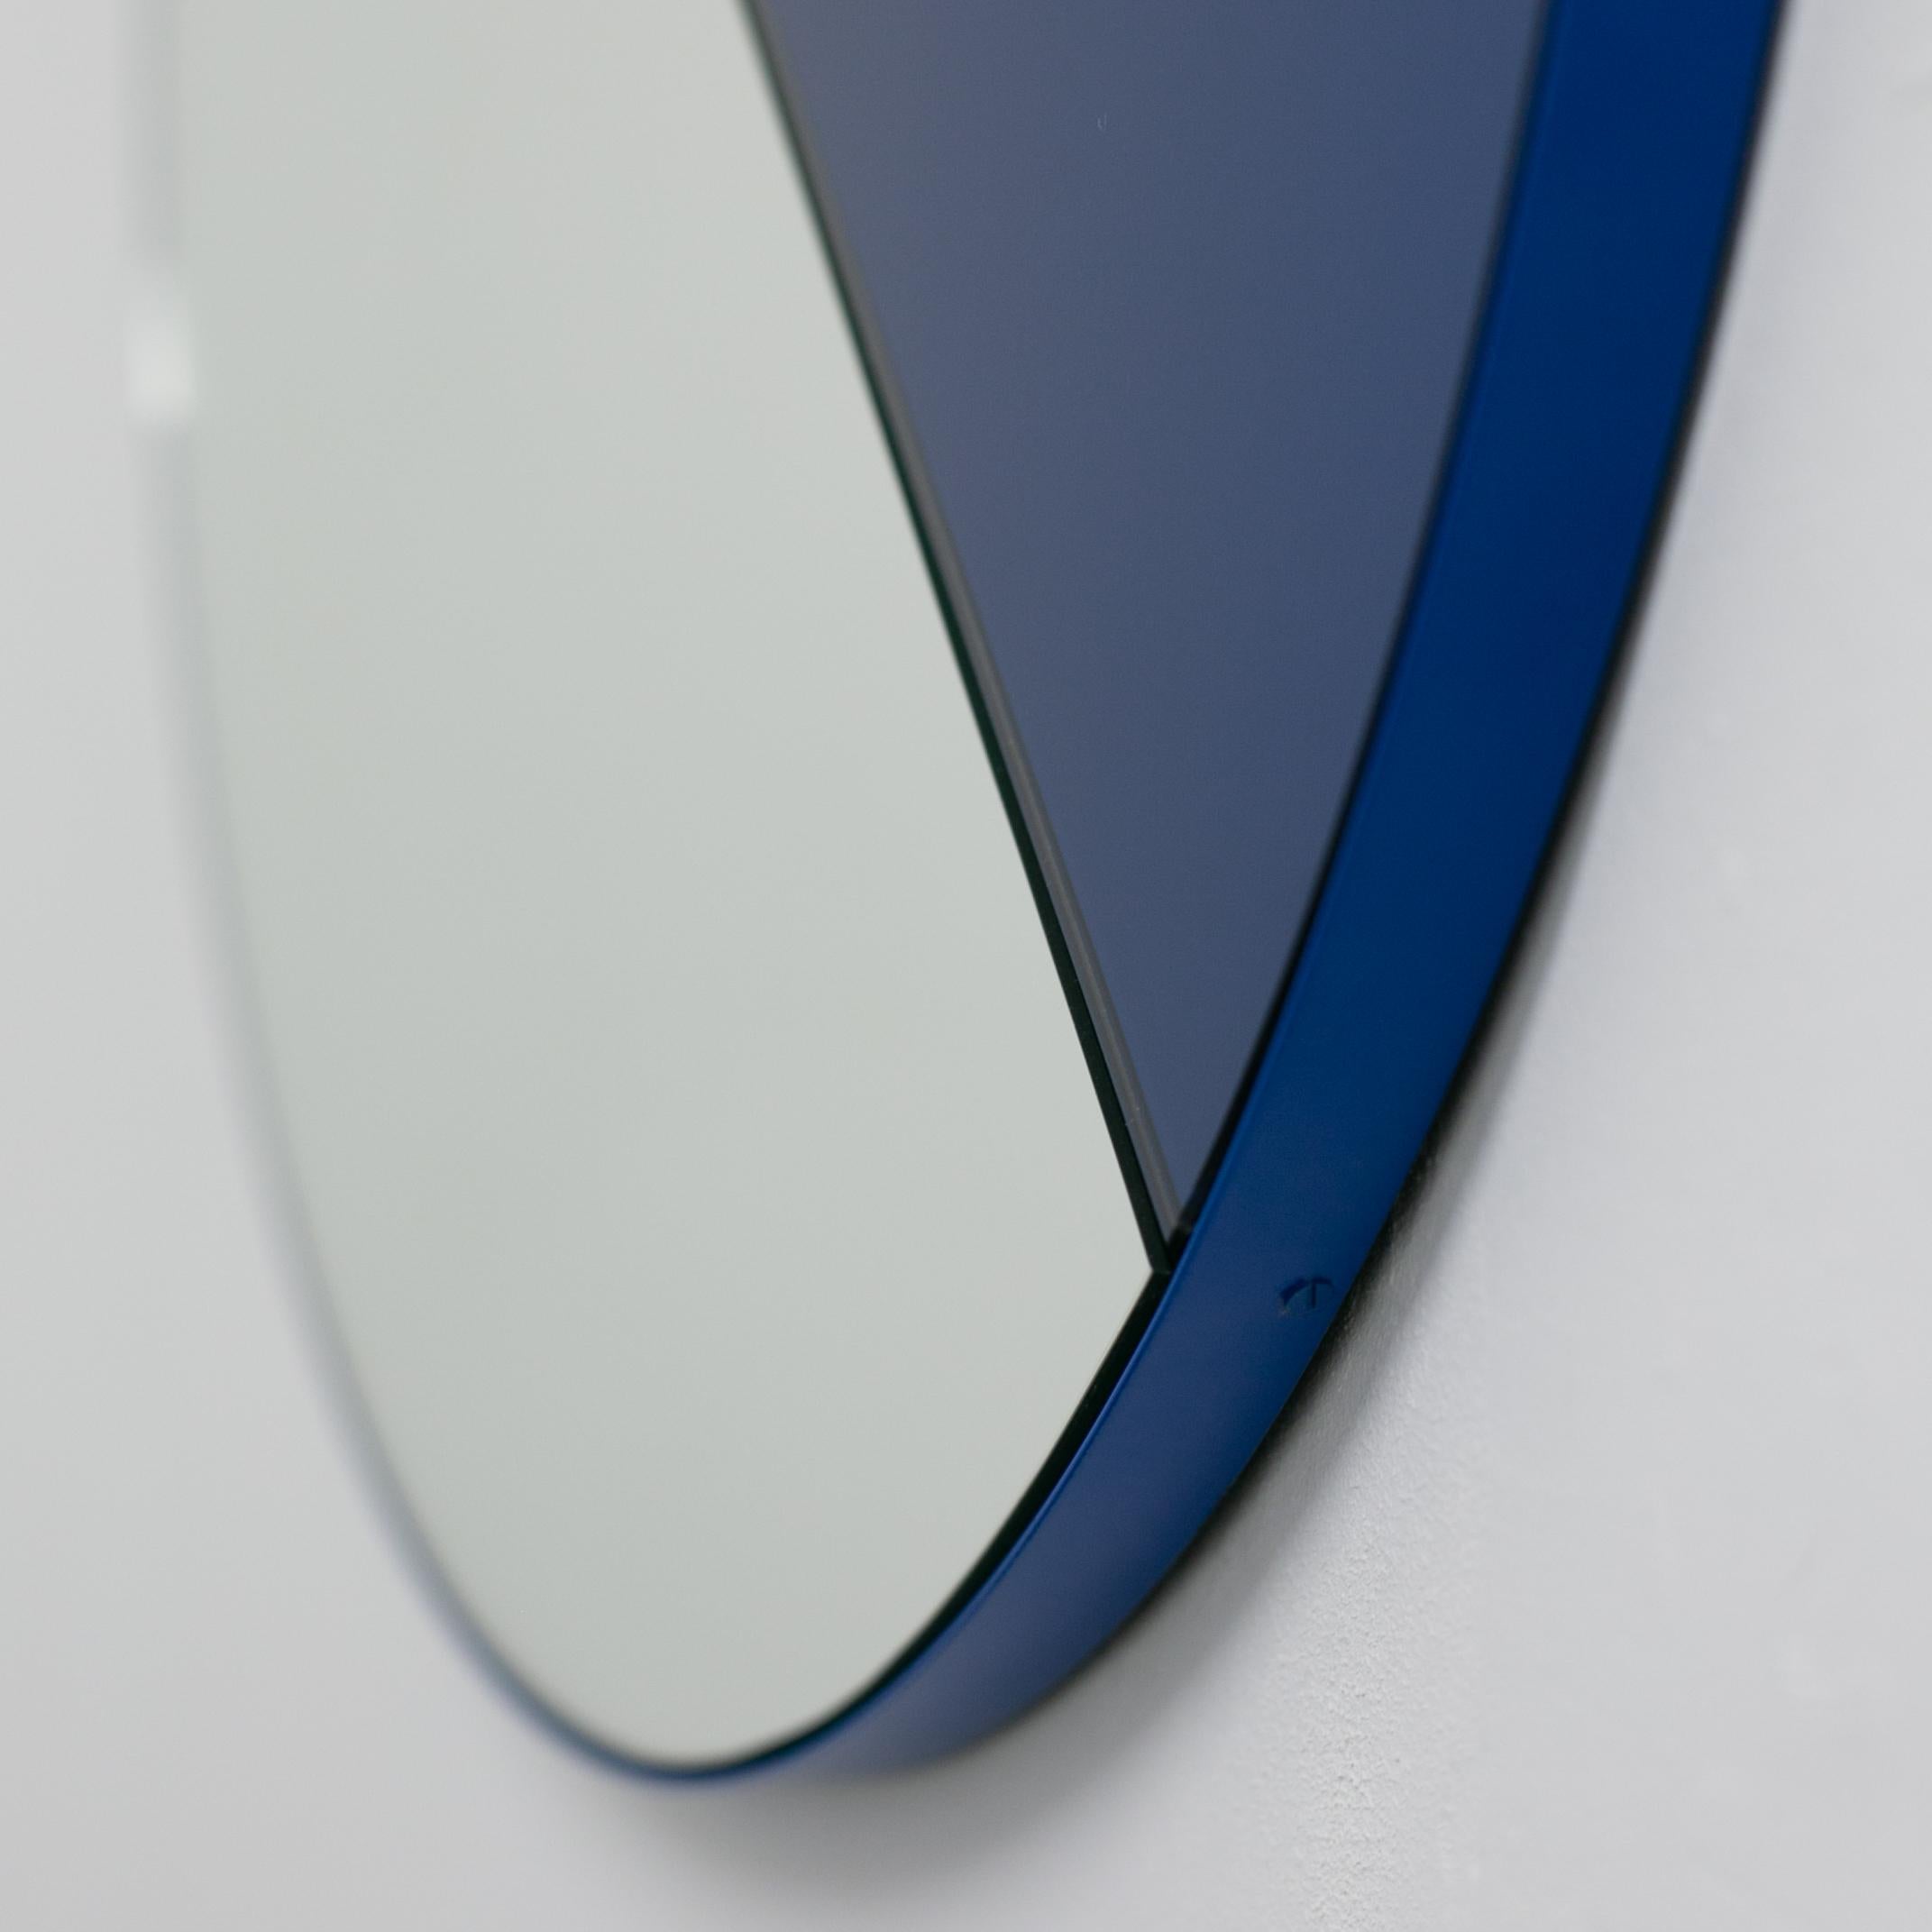 British Orbis Dualis Mixed Tint Blue and Silver Round Mirror with Blue Frame, Regular For Sale